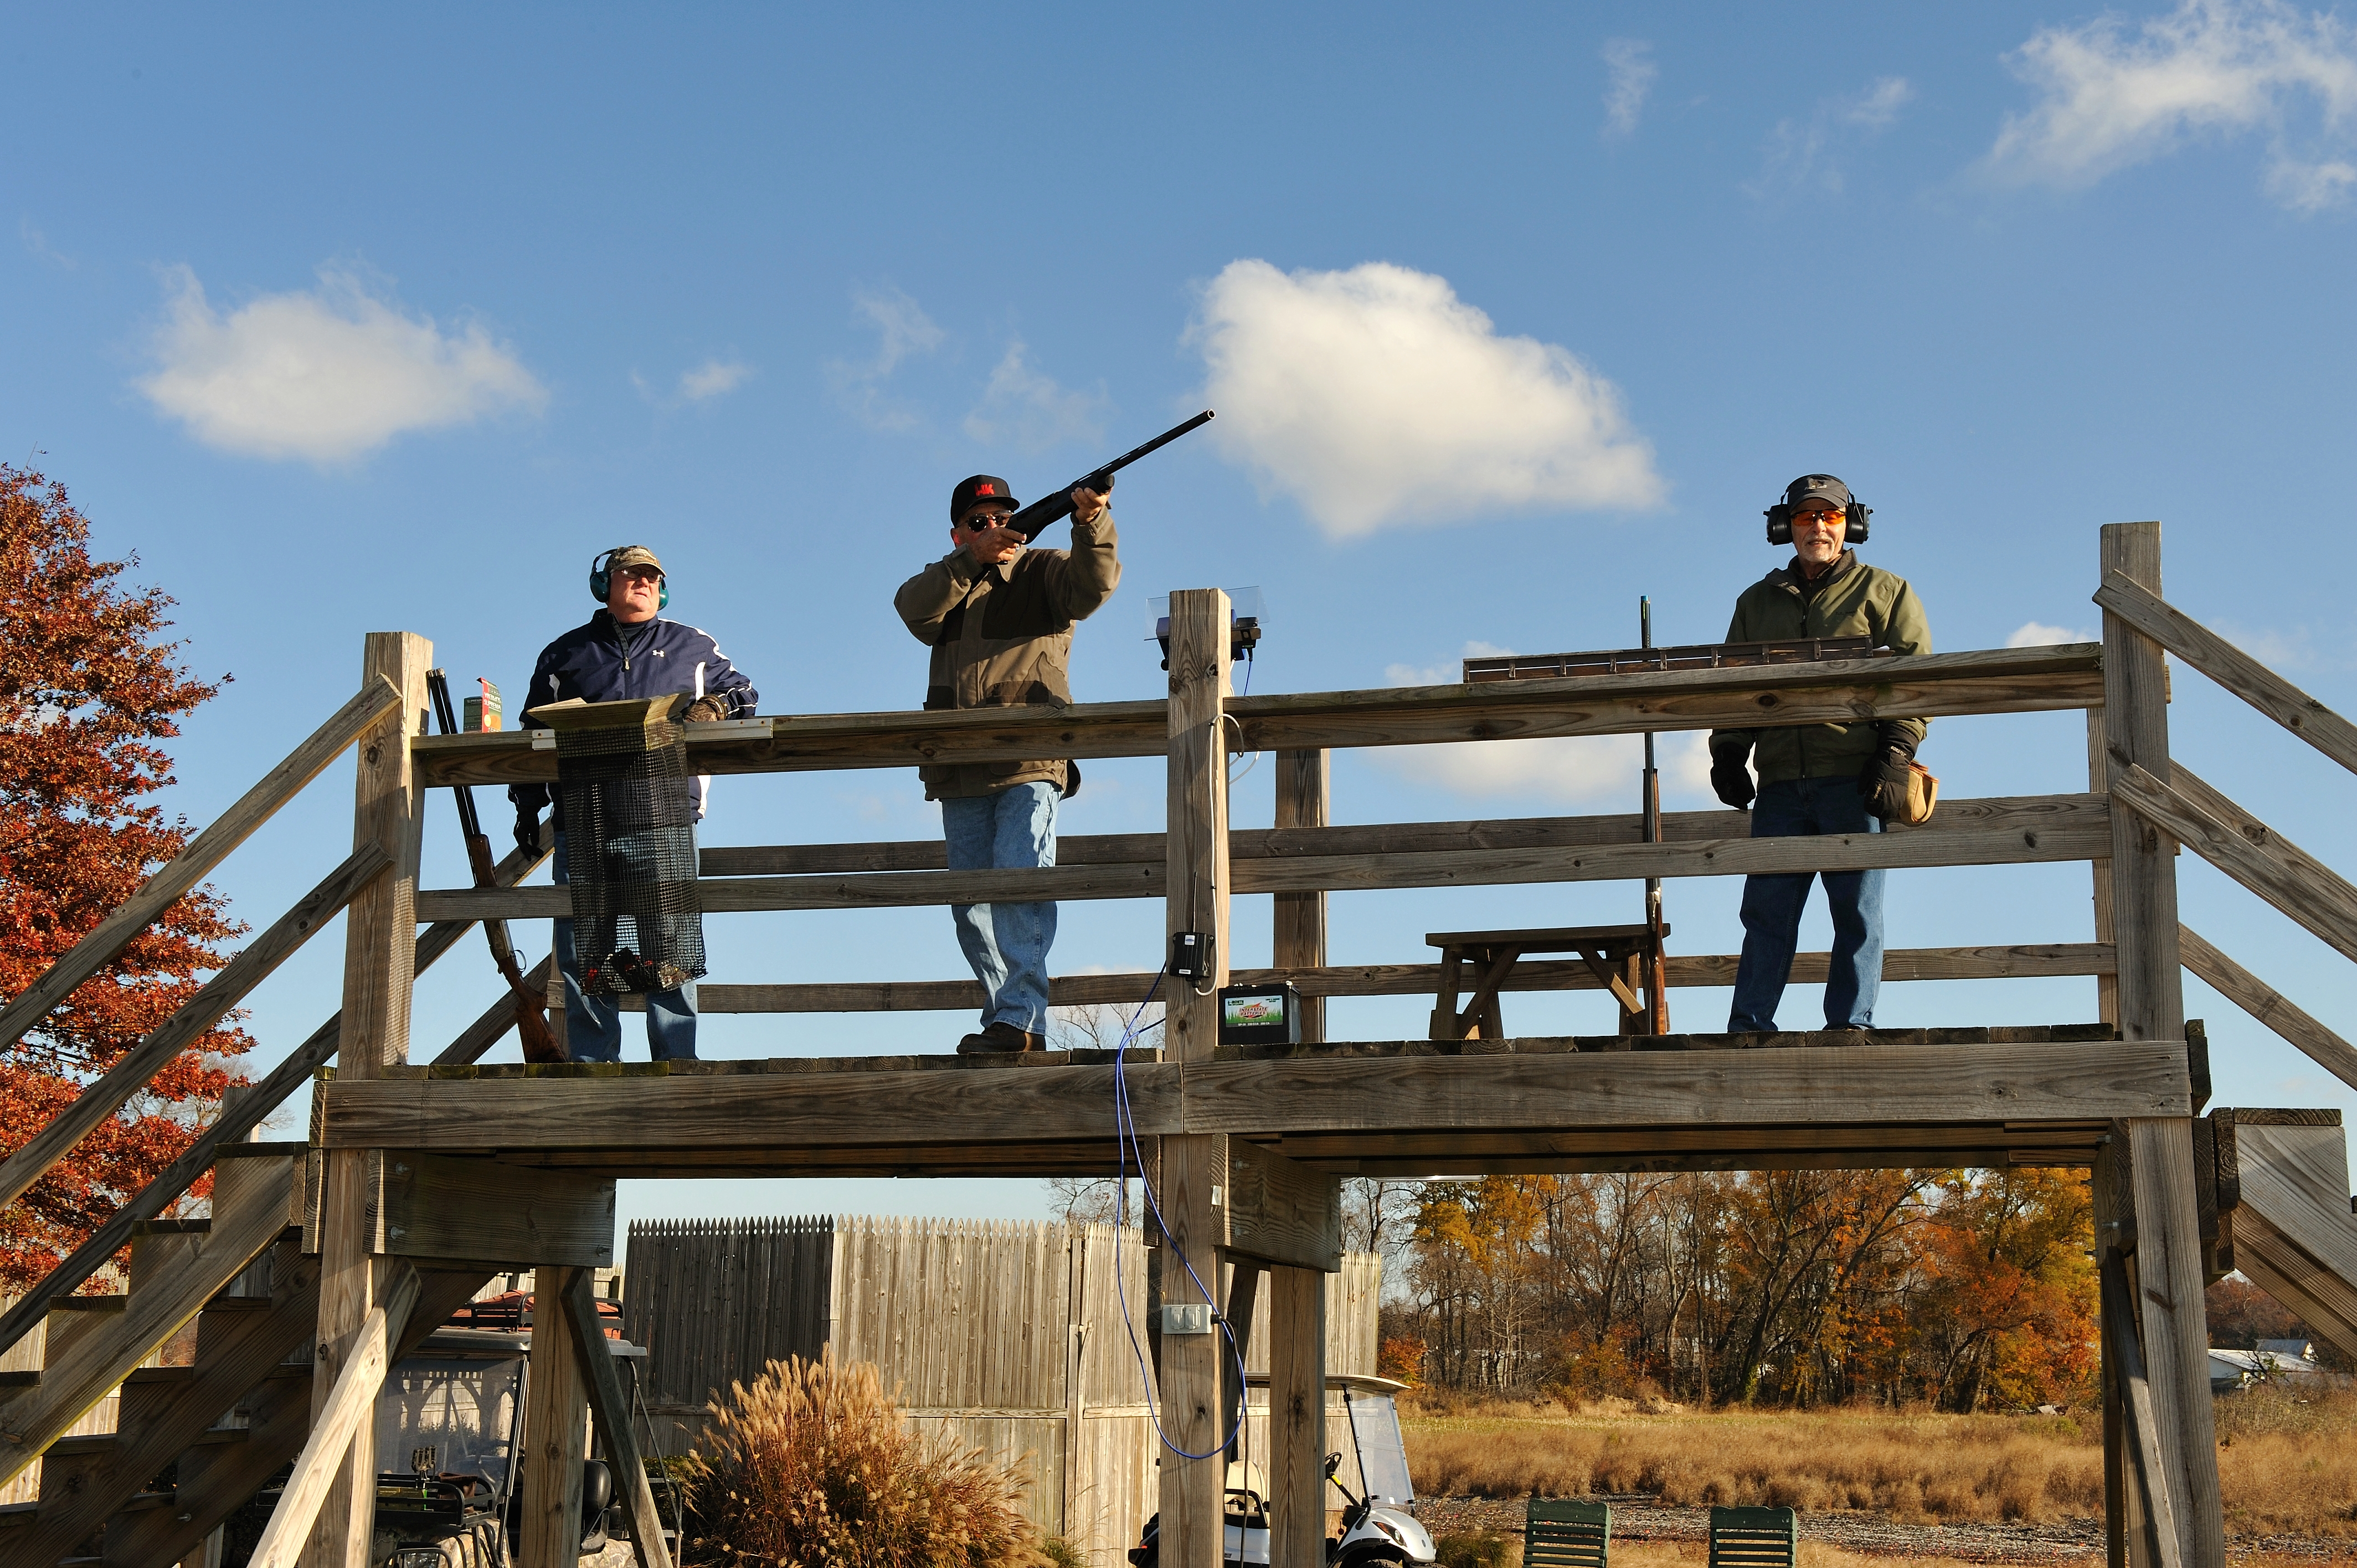 Sporting Clays group